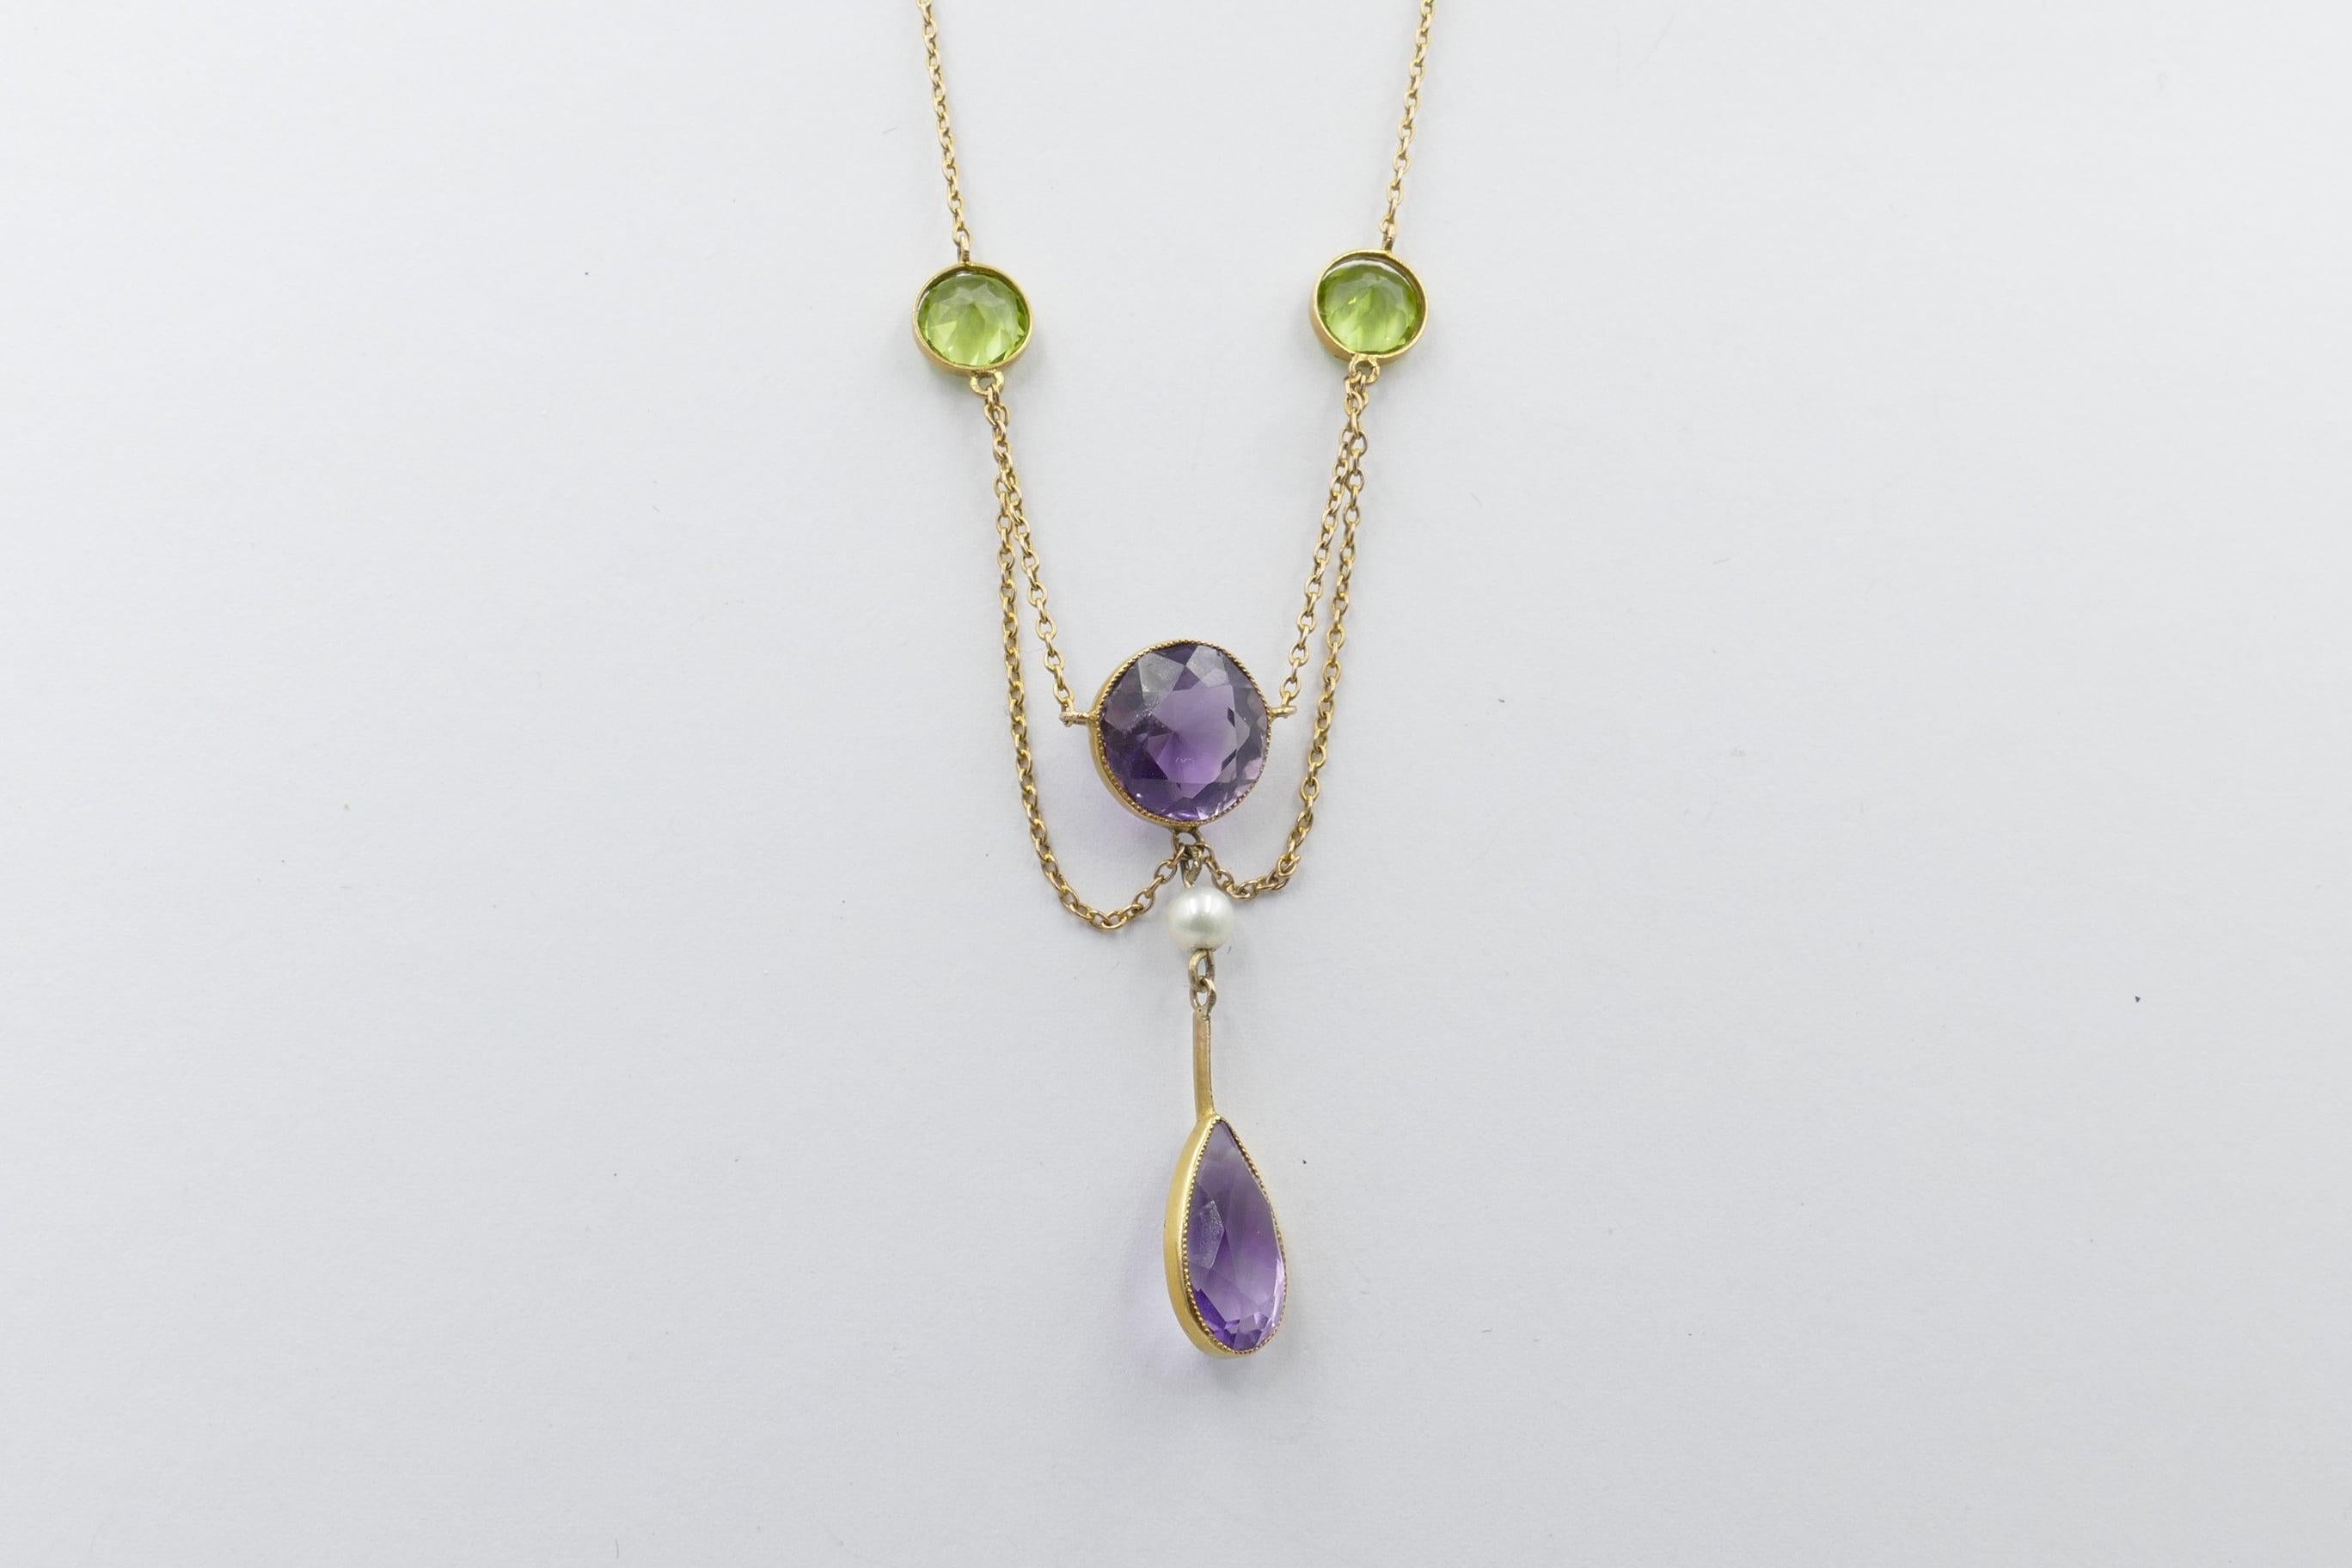 The traditional Colours of the Suffragette Movement, Purple, Green & White are shown to advantage in this genuine (and very hard to source) Suffragette Necklace.
The Amethyst are a strong purple, eye-clean, Round and Pear Cut, Bezel Set. 2 Peridots